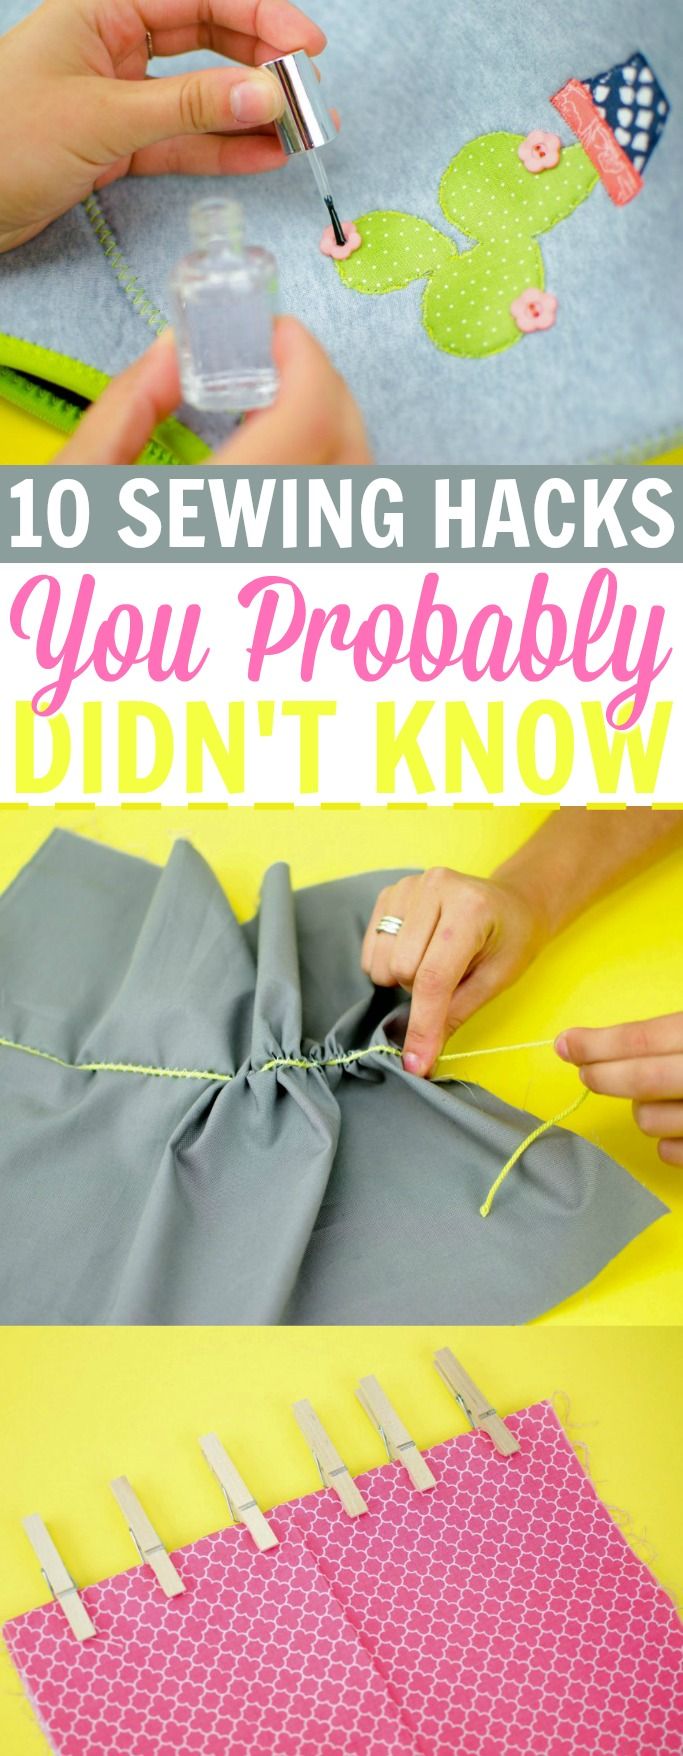 I’m so happy to share these 10 Sewing Hacks You Probably Didn’t Know with yo...